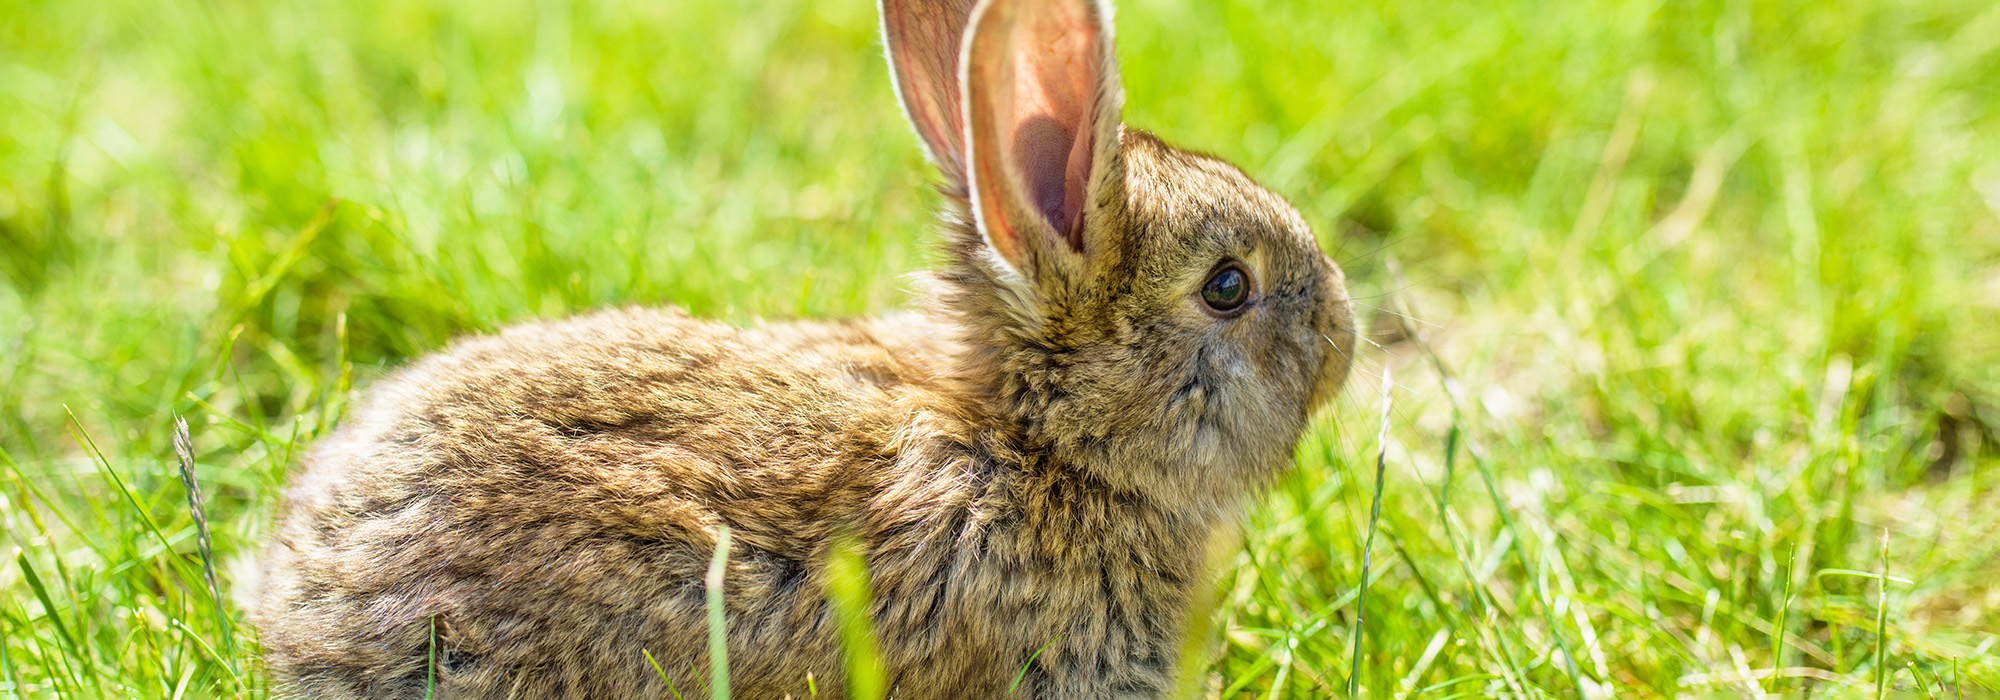 A rabbit sits in a field